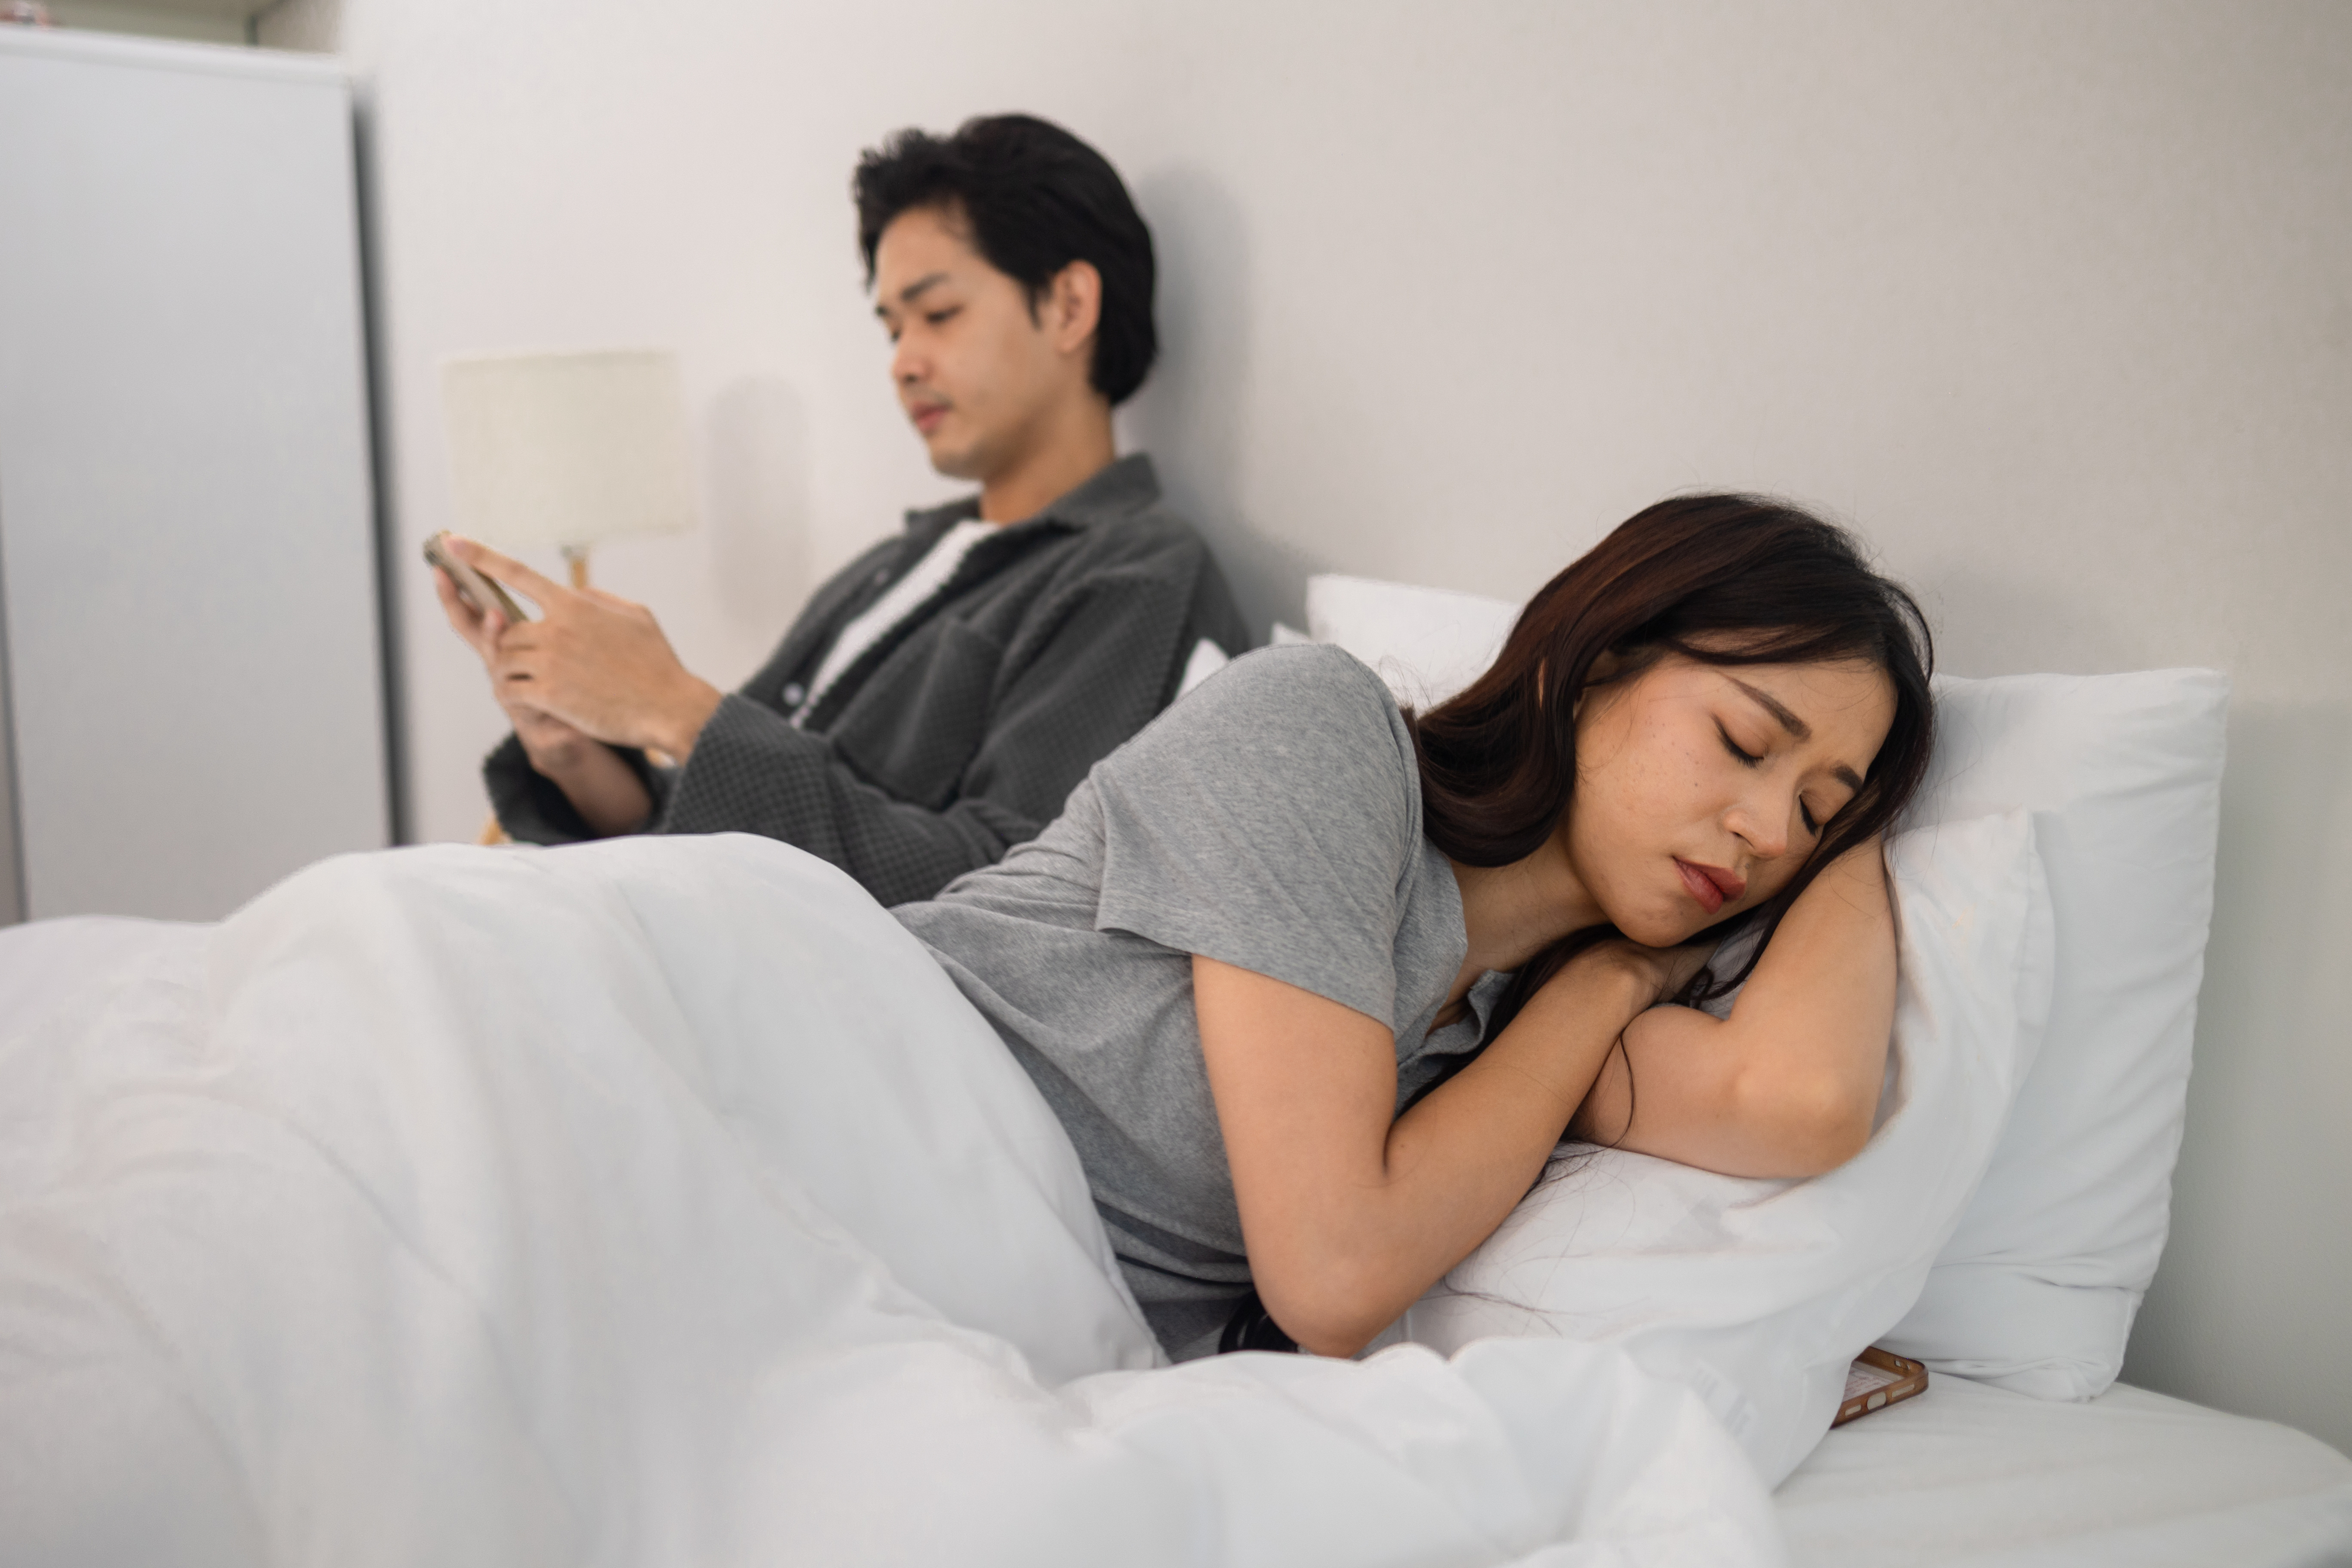 couple in bed. man on phone while woman sleeps